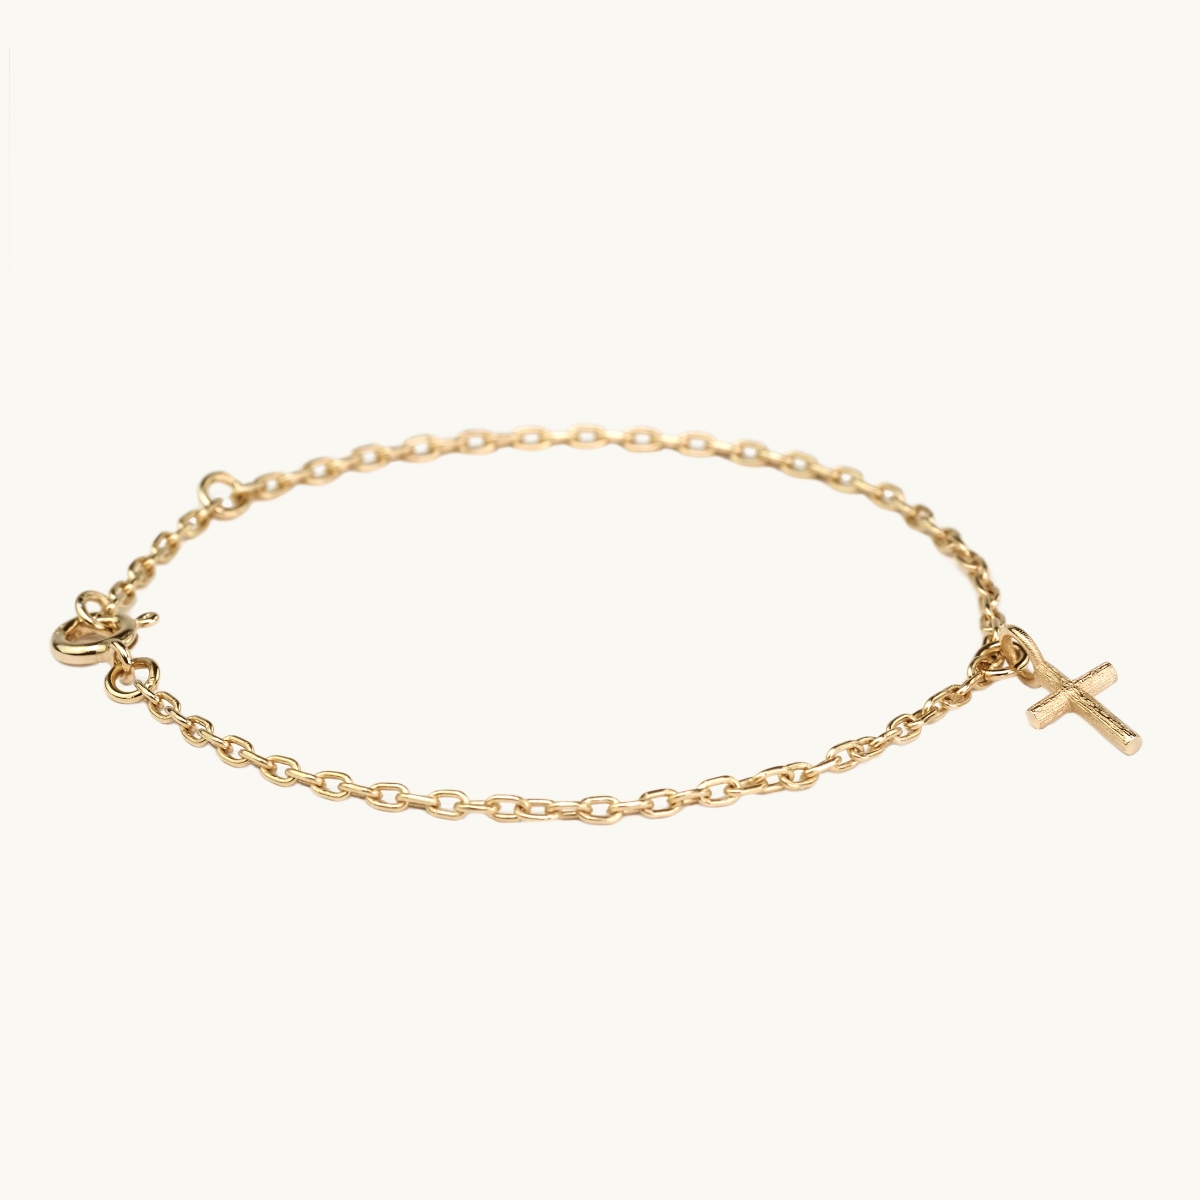 Bracelet in gold with a cross pendant